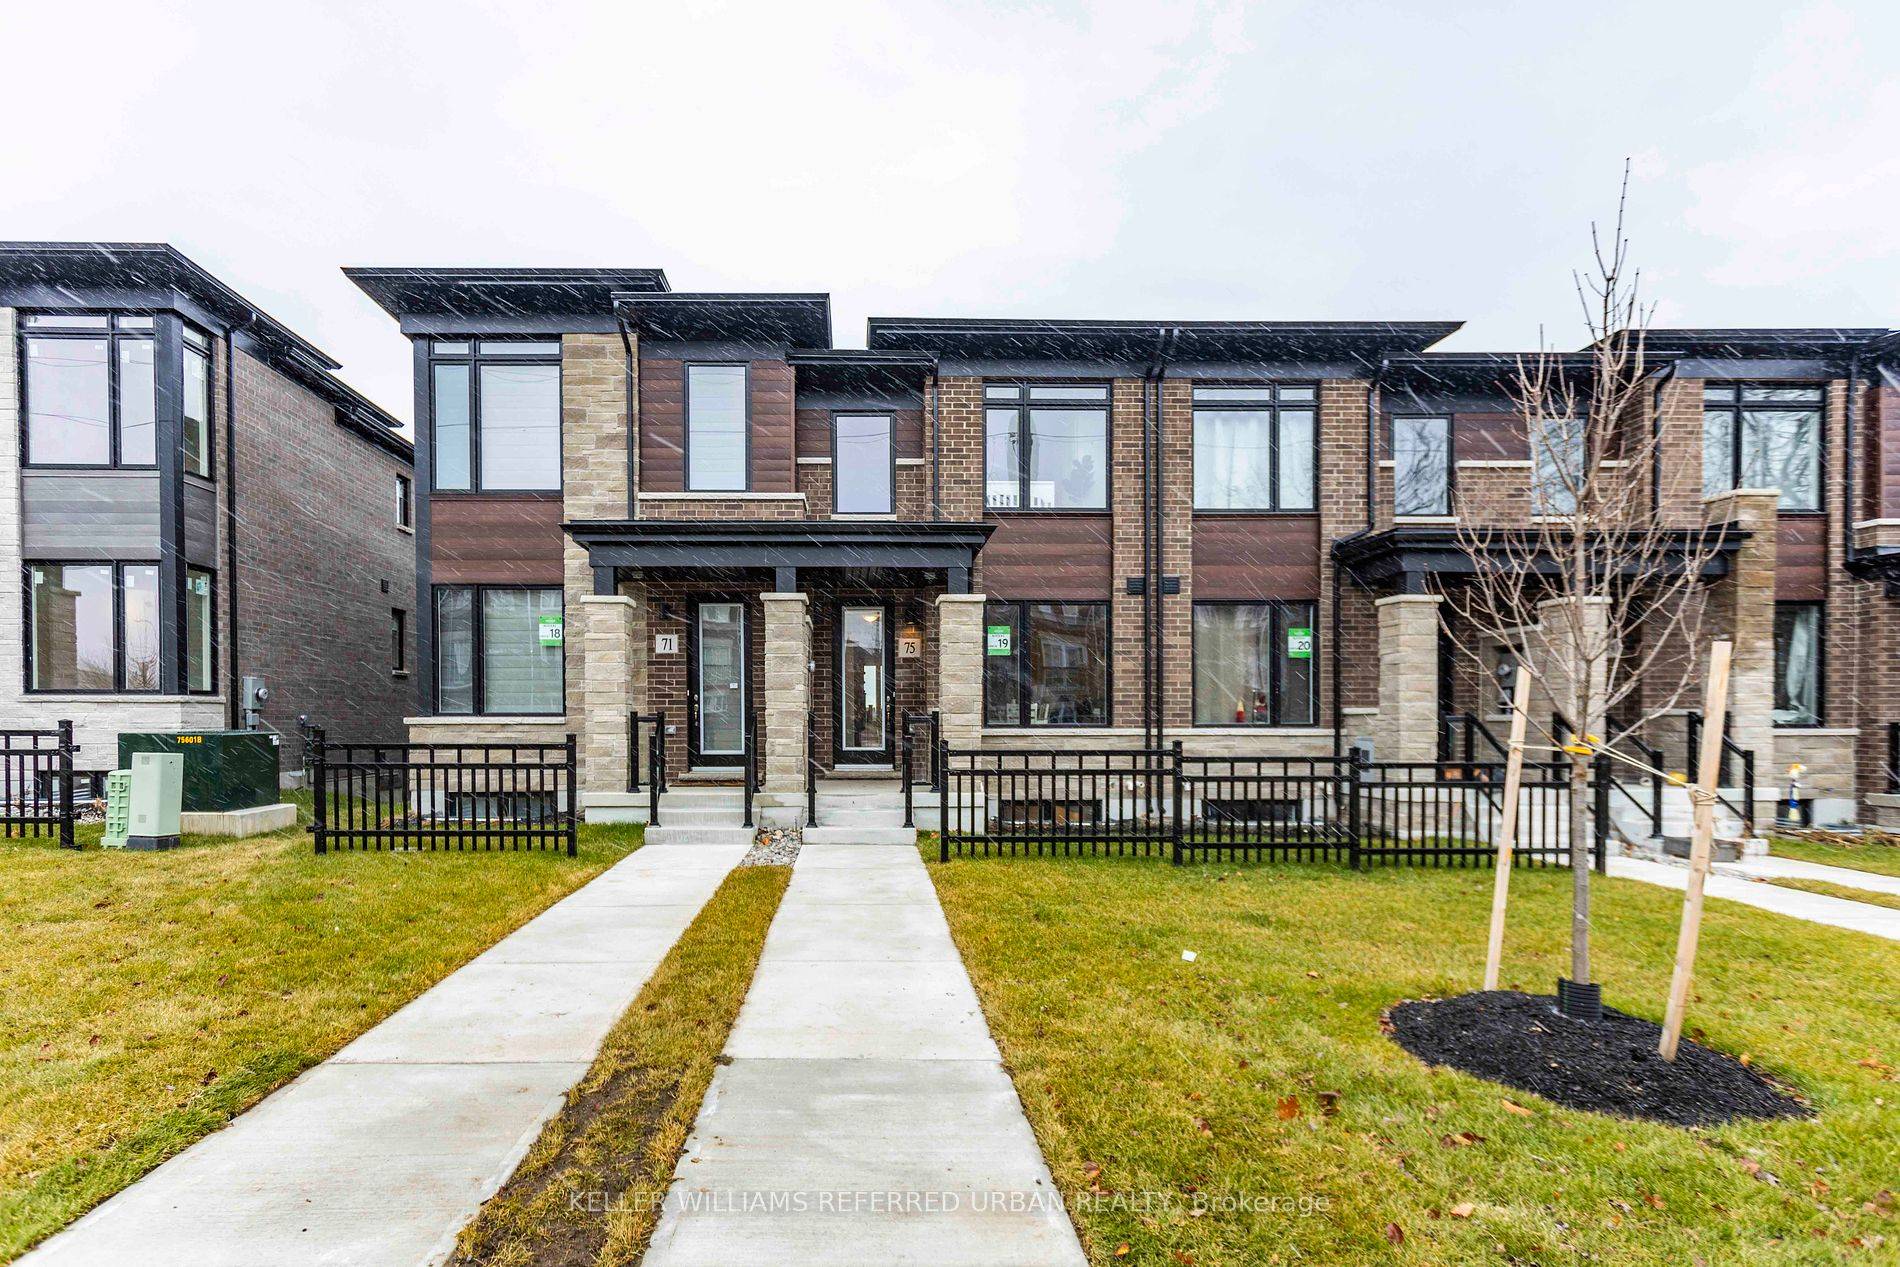 Don't Miss out on this Gorgeous 1 Year New 2014sf 4 Bedroom, 4 Bathroom Luxury Townhome in one of Bowmanville's Most Desirable Areas.